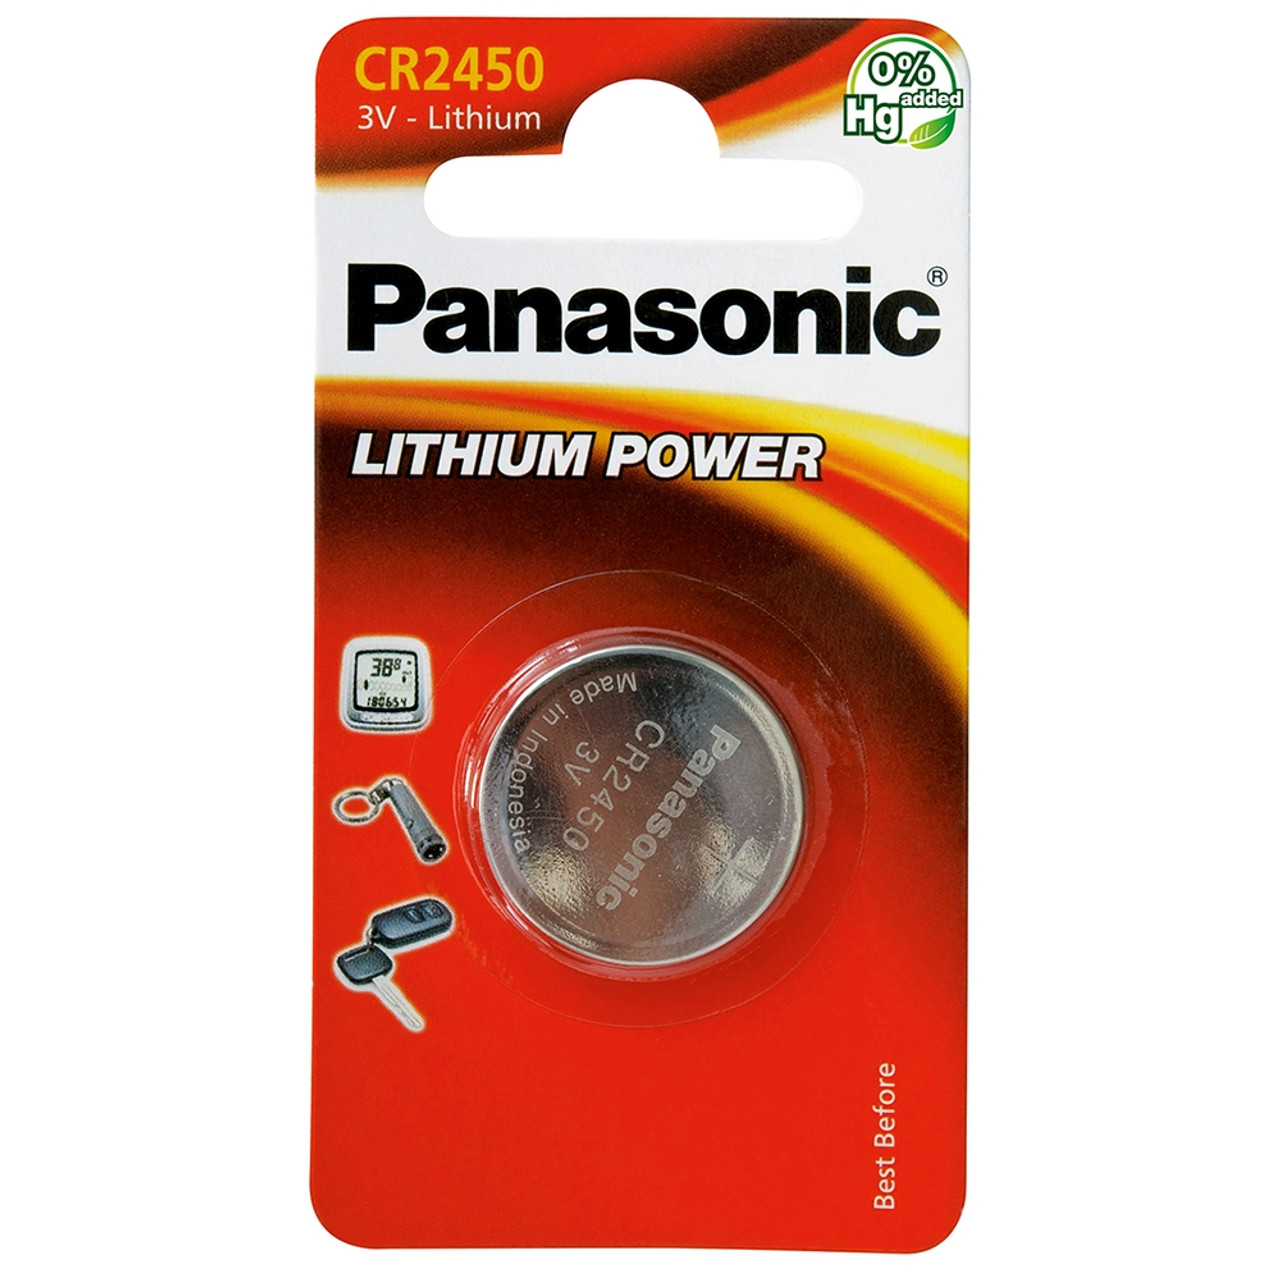 https://cdn11.bigcommerce.com/s-od7gc54jw0/images/stencil/1280x1280/products/502/507/pan-cc-02288_panasonic_cr2450_coin_cell_battery___1_pack__86530.1550057446.jpg?c=2?imbypass=on